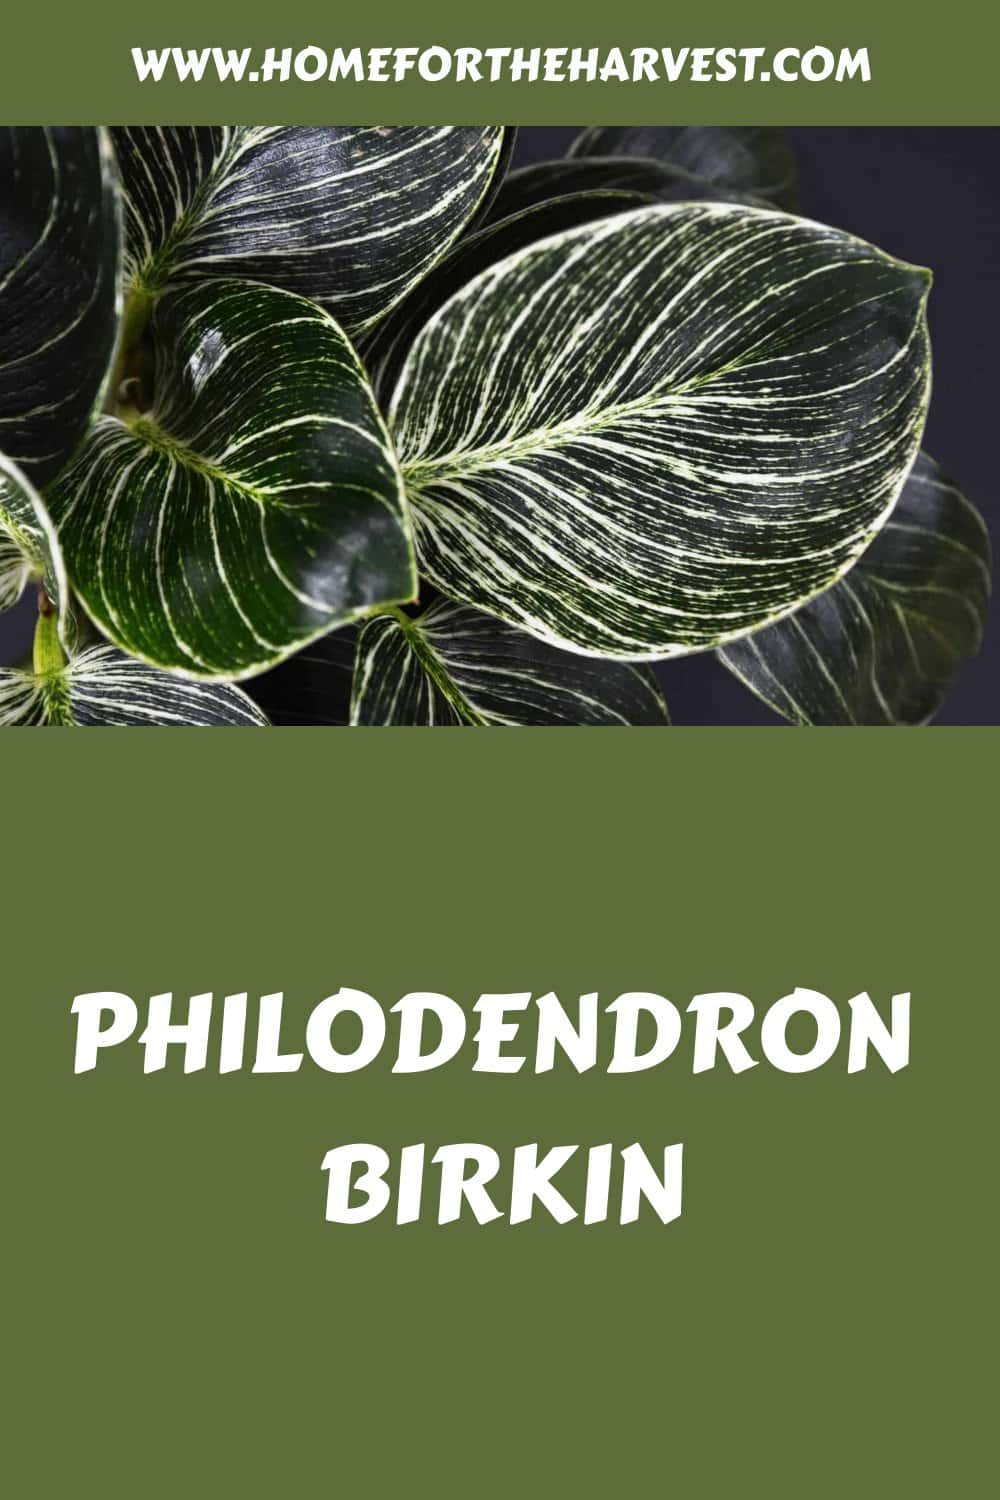 Philodendron birkin generated pin 22580